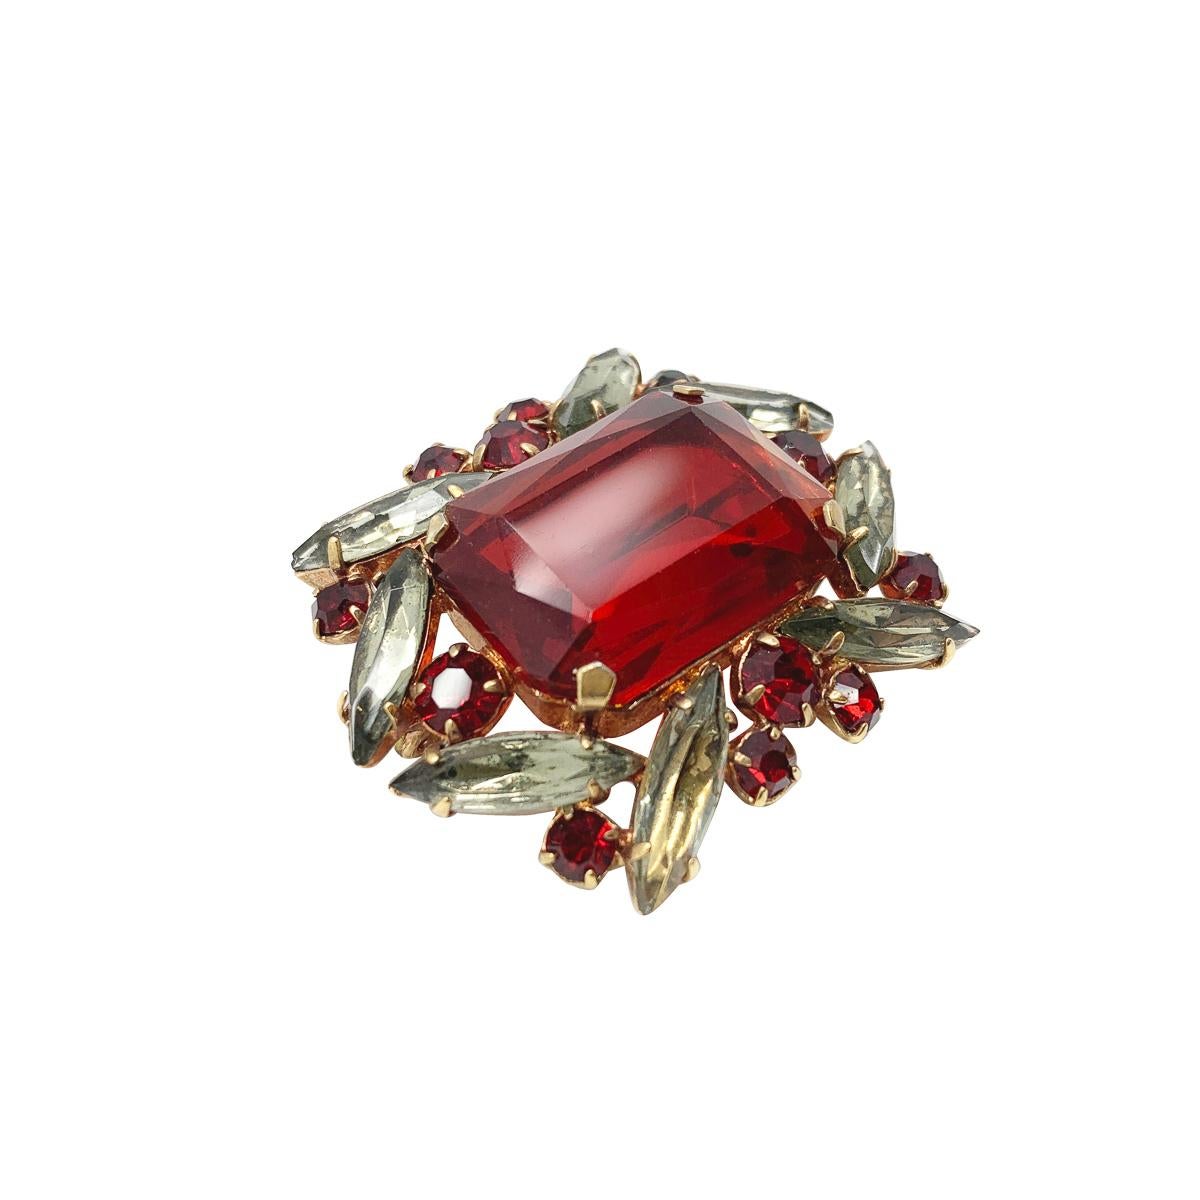 Vintage Emerald Cut Ruby Crystal Cocktail Brooch 1940s In Good Condition For Sale In Wilmslow, GB